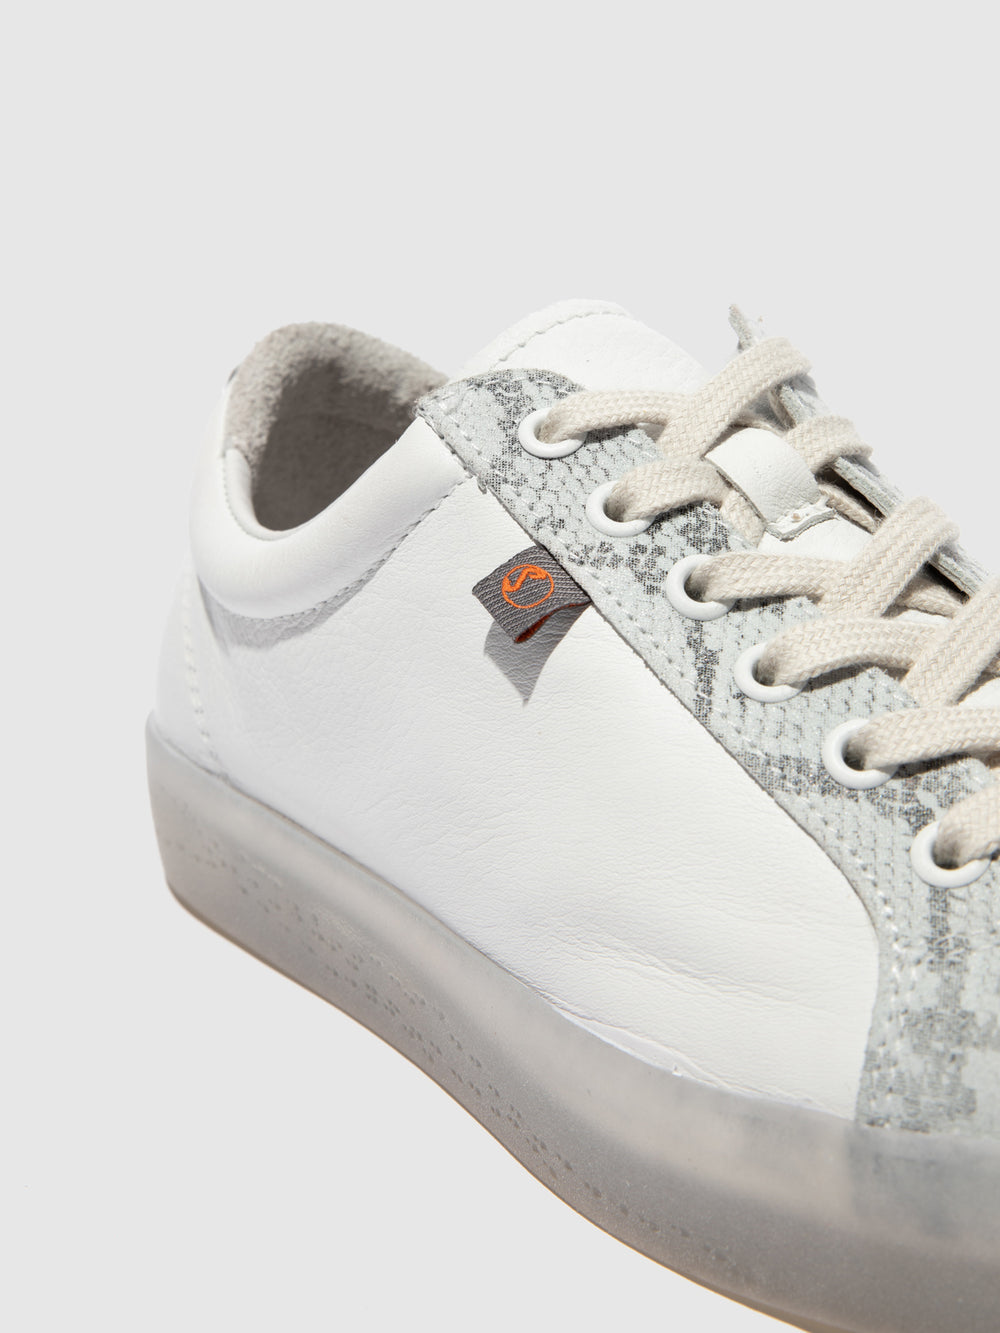 Lace-up Trainers SURY585SOF SMOOTH WHITE/LIGHT GREY SNAKE